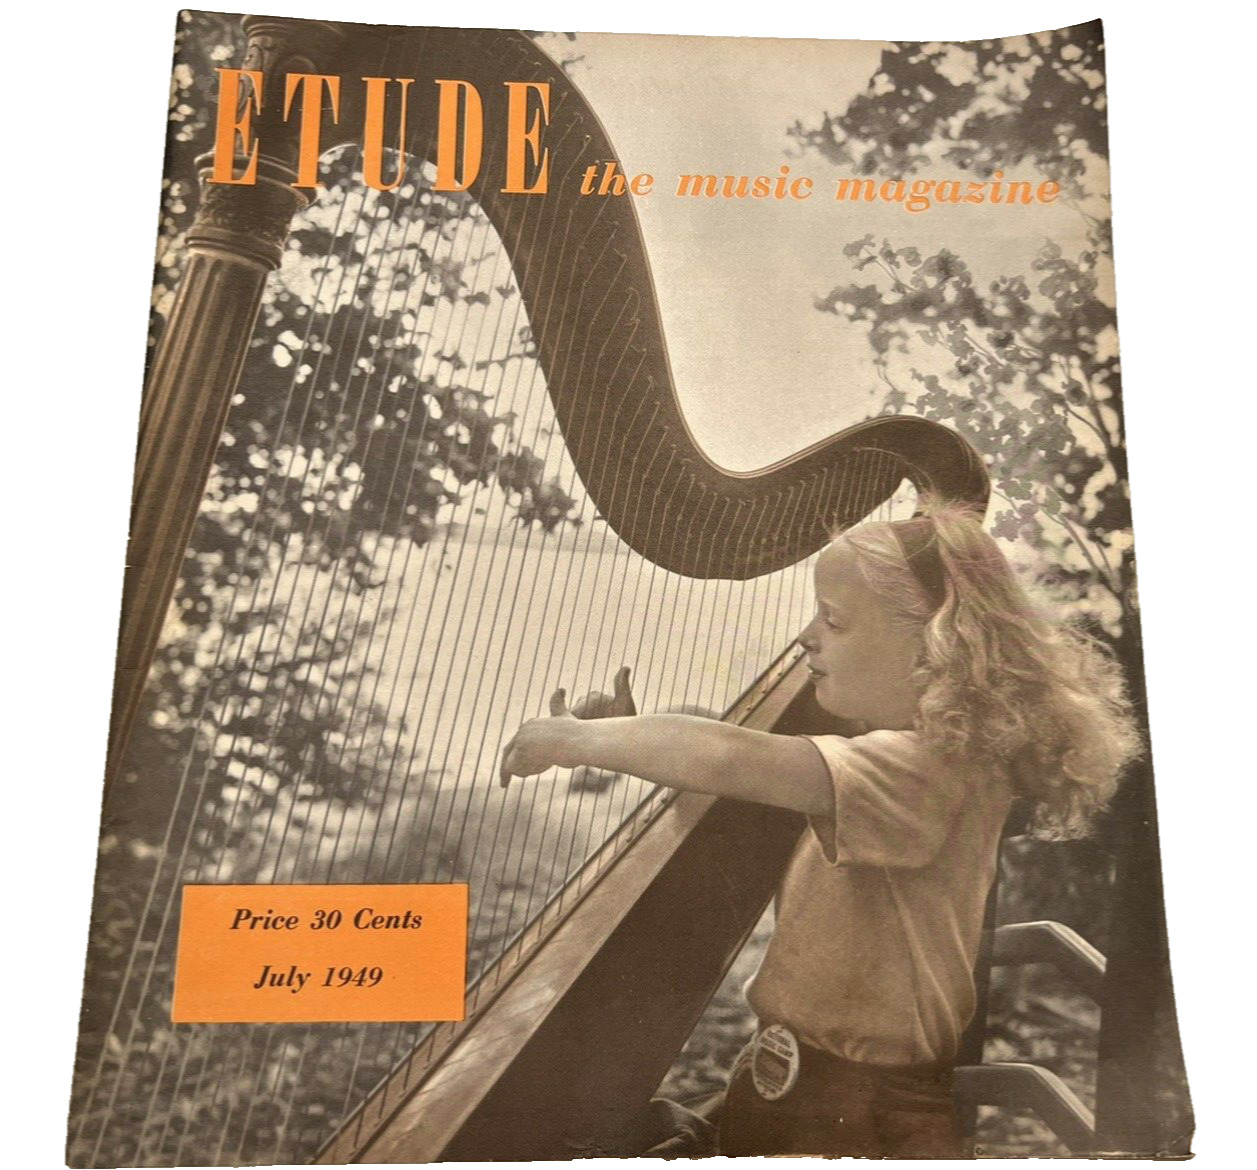 Music Magazine A Vintage Etude July 1949 A Young Girl Playing A Harp.